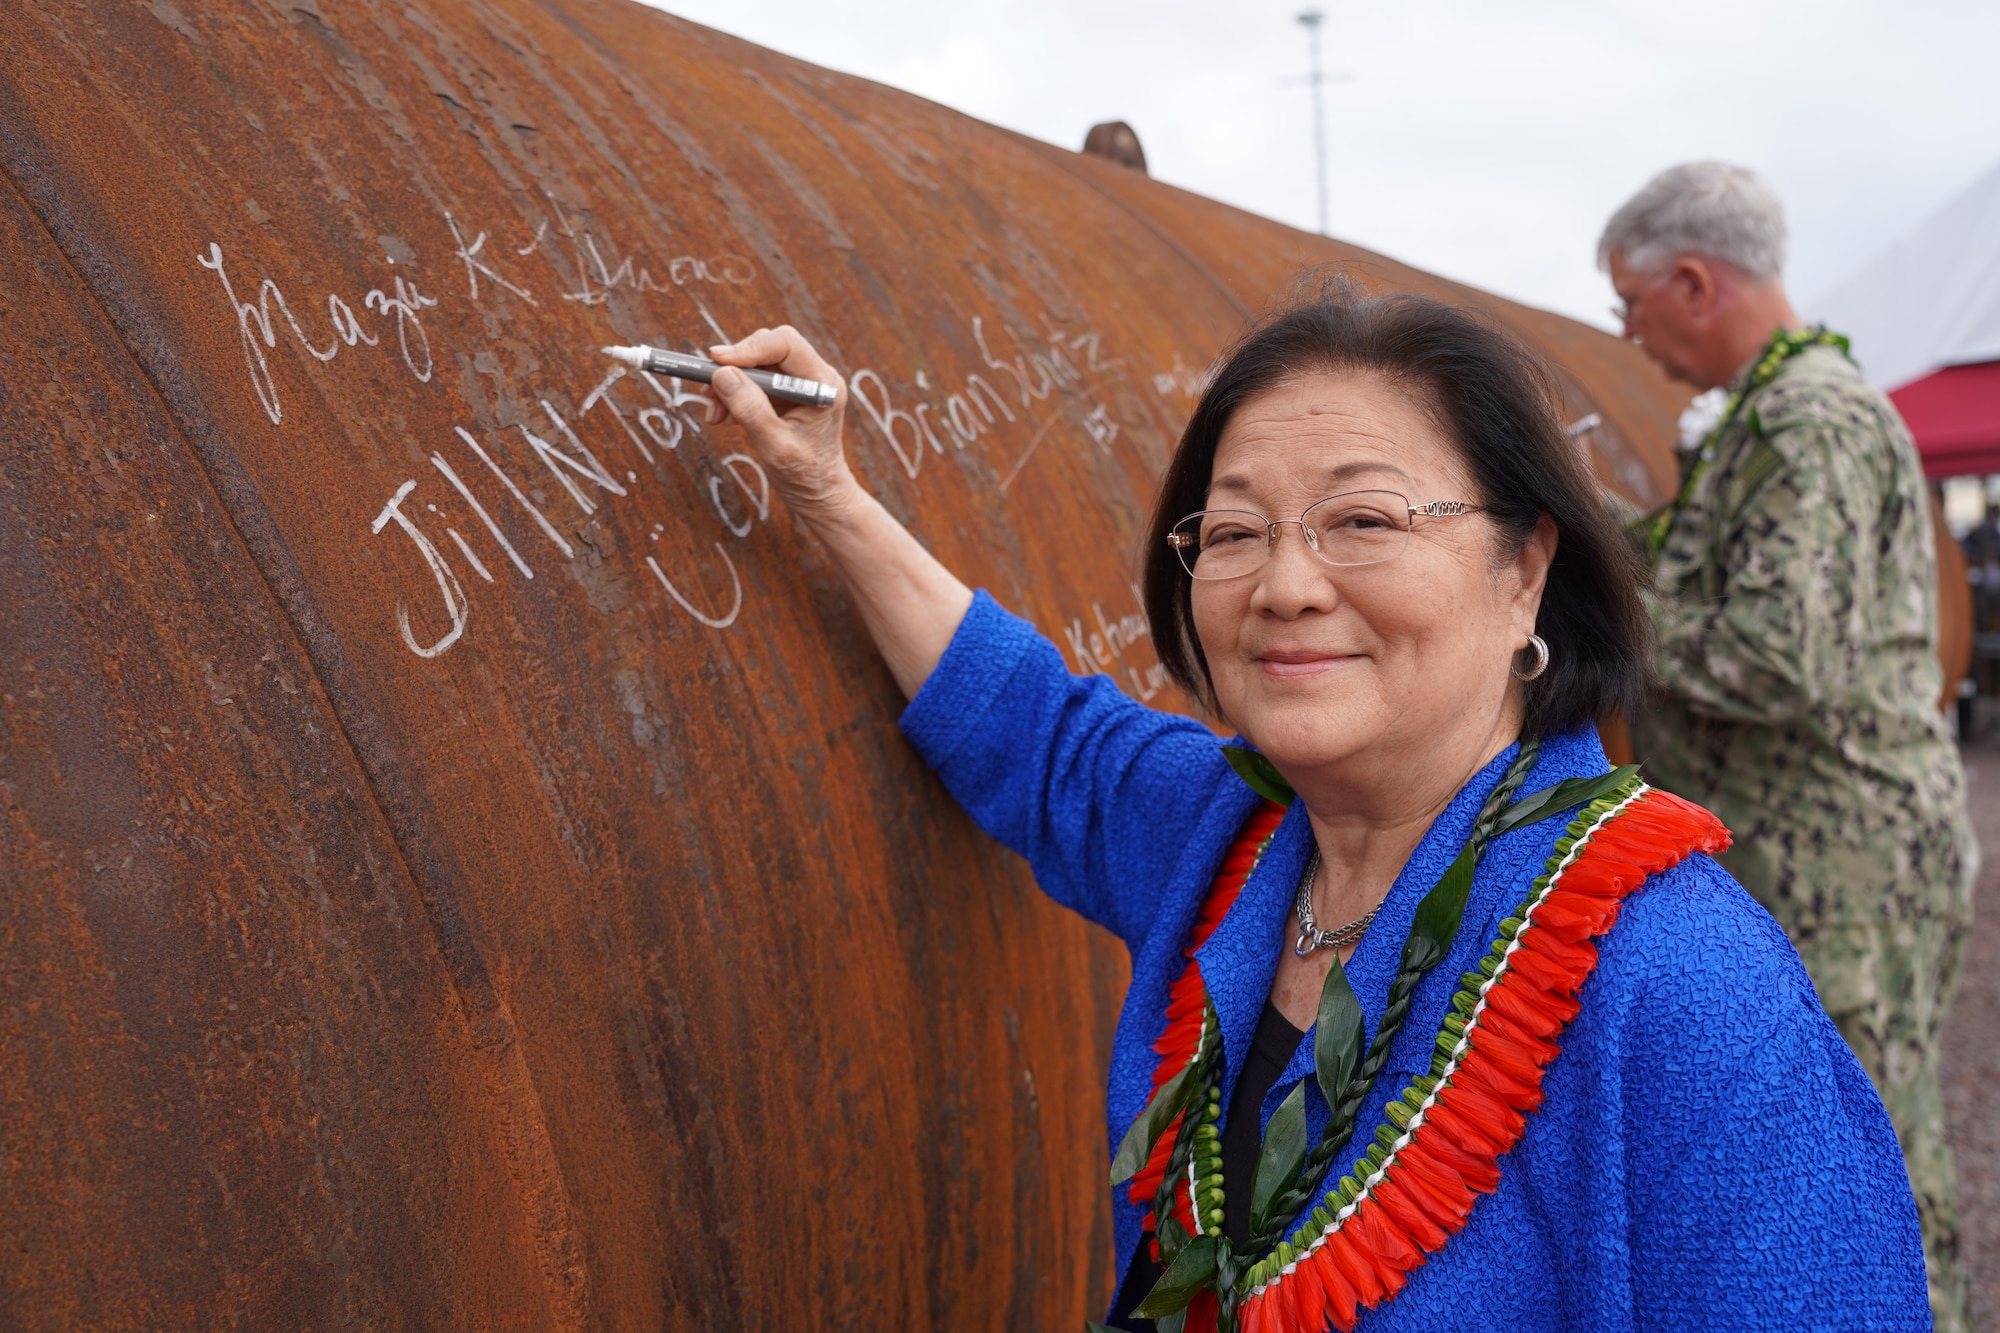 Hawaii Sen. Mazie Hirono adds her name to history at the Pearl Harbor Naval Shipyard & Intermediate Maintenance Facility (PHNSY & IMF) Dry Dock 5 Anchoring Ceremony as she signs a pile that will become part of the first new dry dock to be built at PHNSY & IMF since 1943.